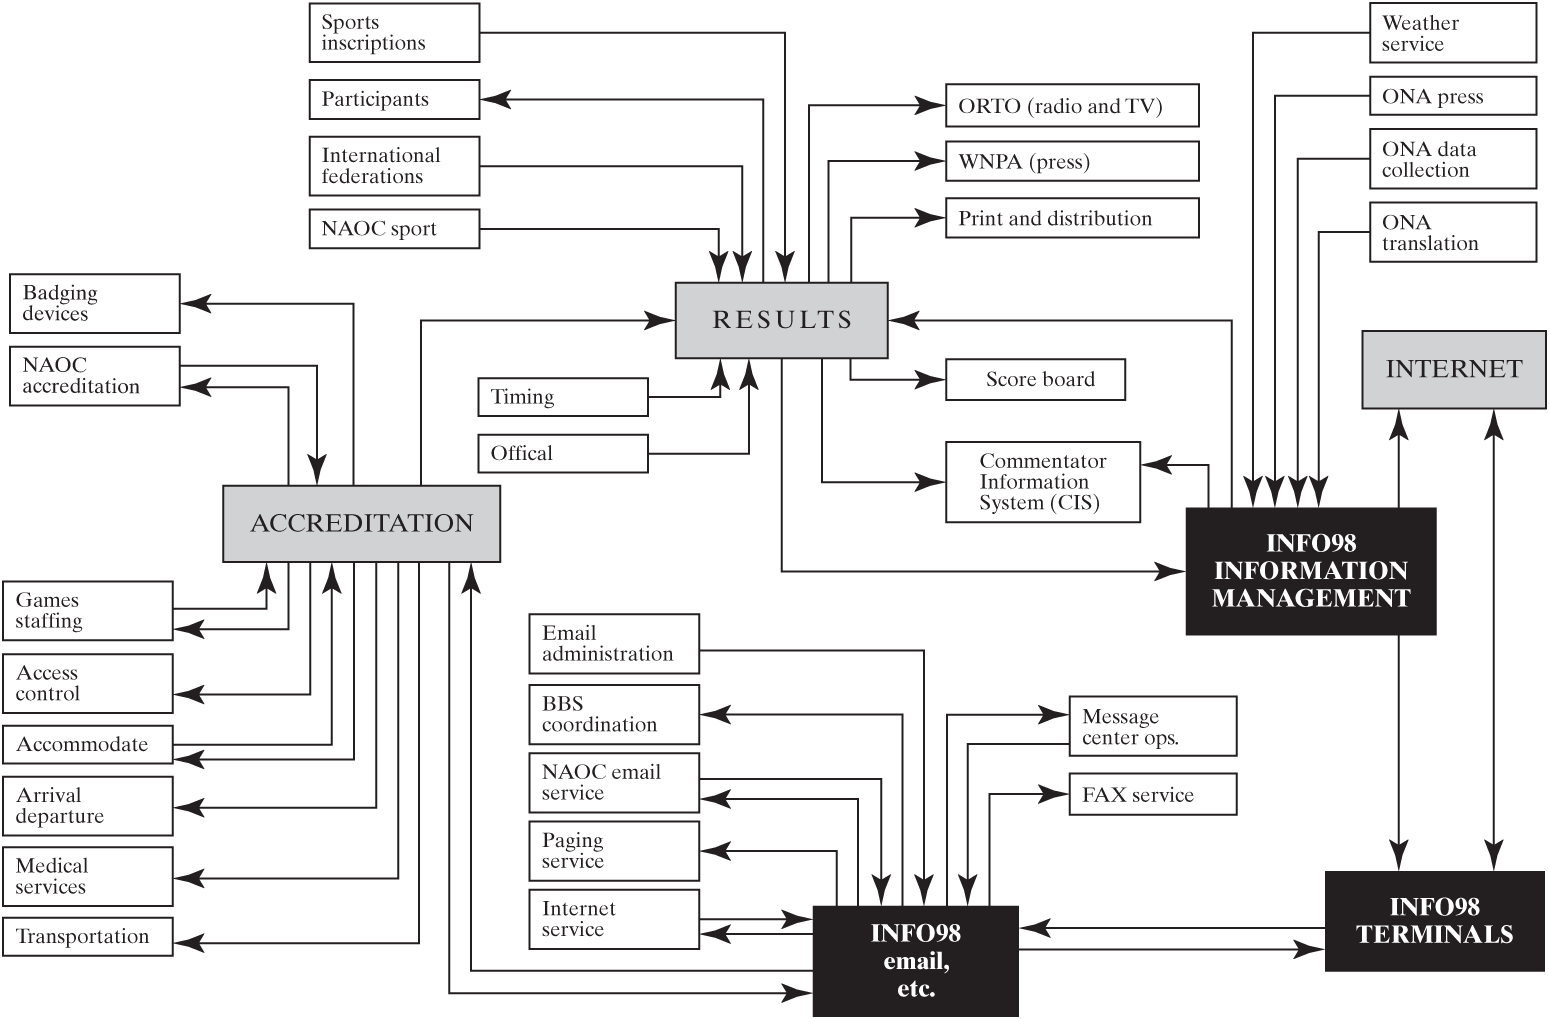 The data flow diagram shows flows between results, accreditation, and the internet components, as well as info 98 information management, info 98 terminals, and info 98 email, etc. components.